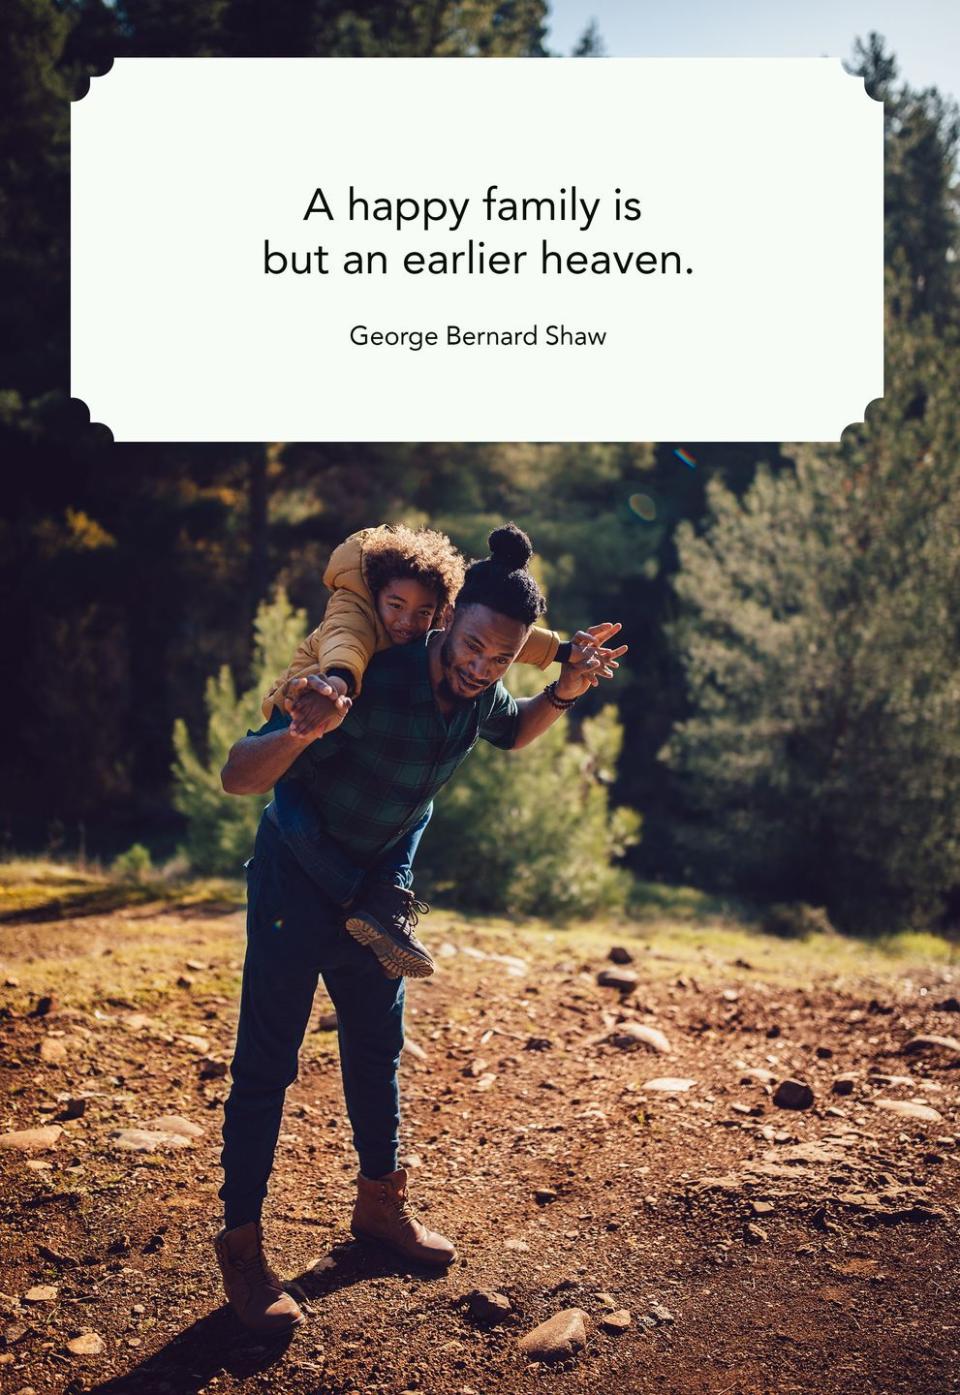 Meaningful (and Funny!) Quotes About Family to Share With Your Relatives